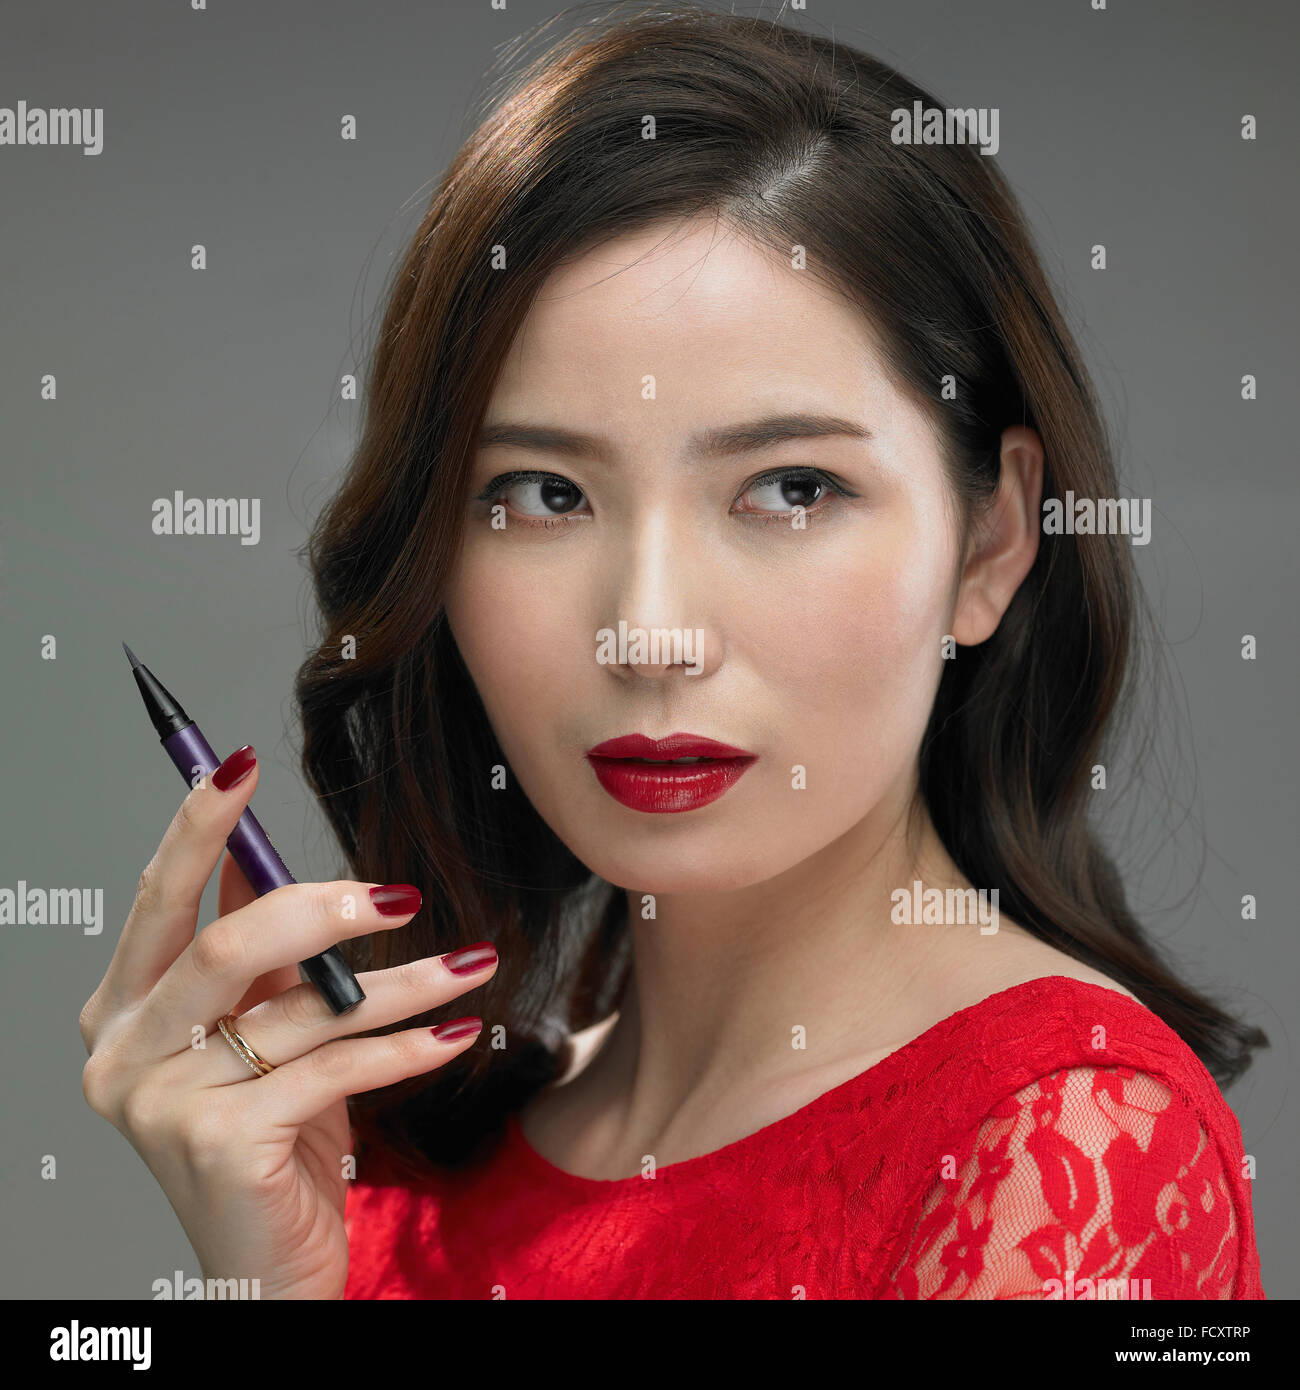 Portrait of young woman with red lips and red blouse posing with an eyeliner Stock Photo